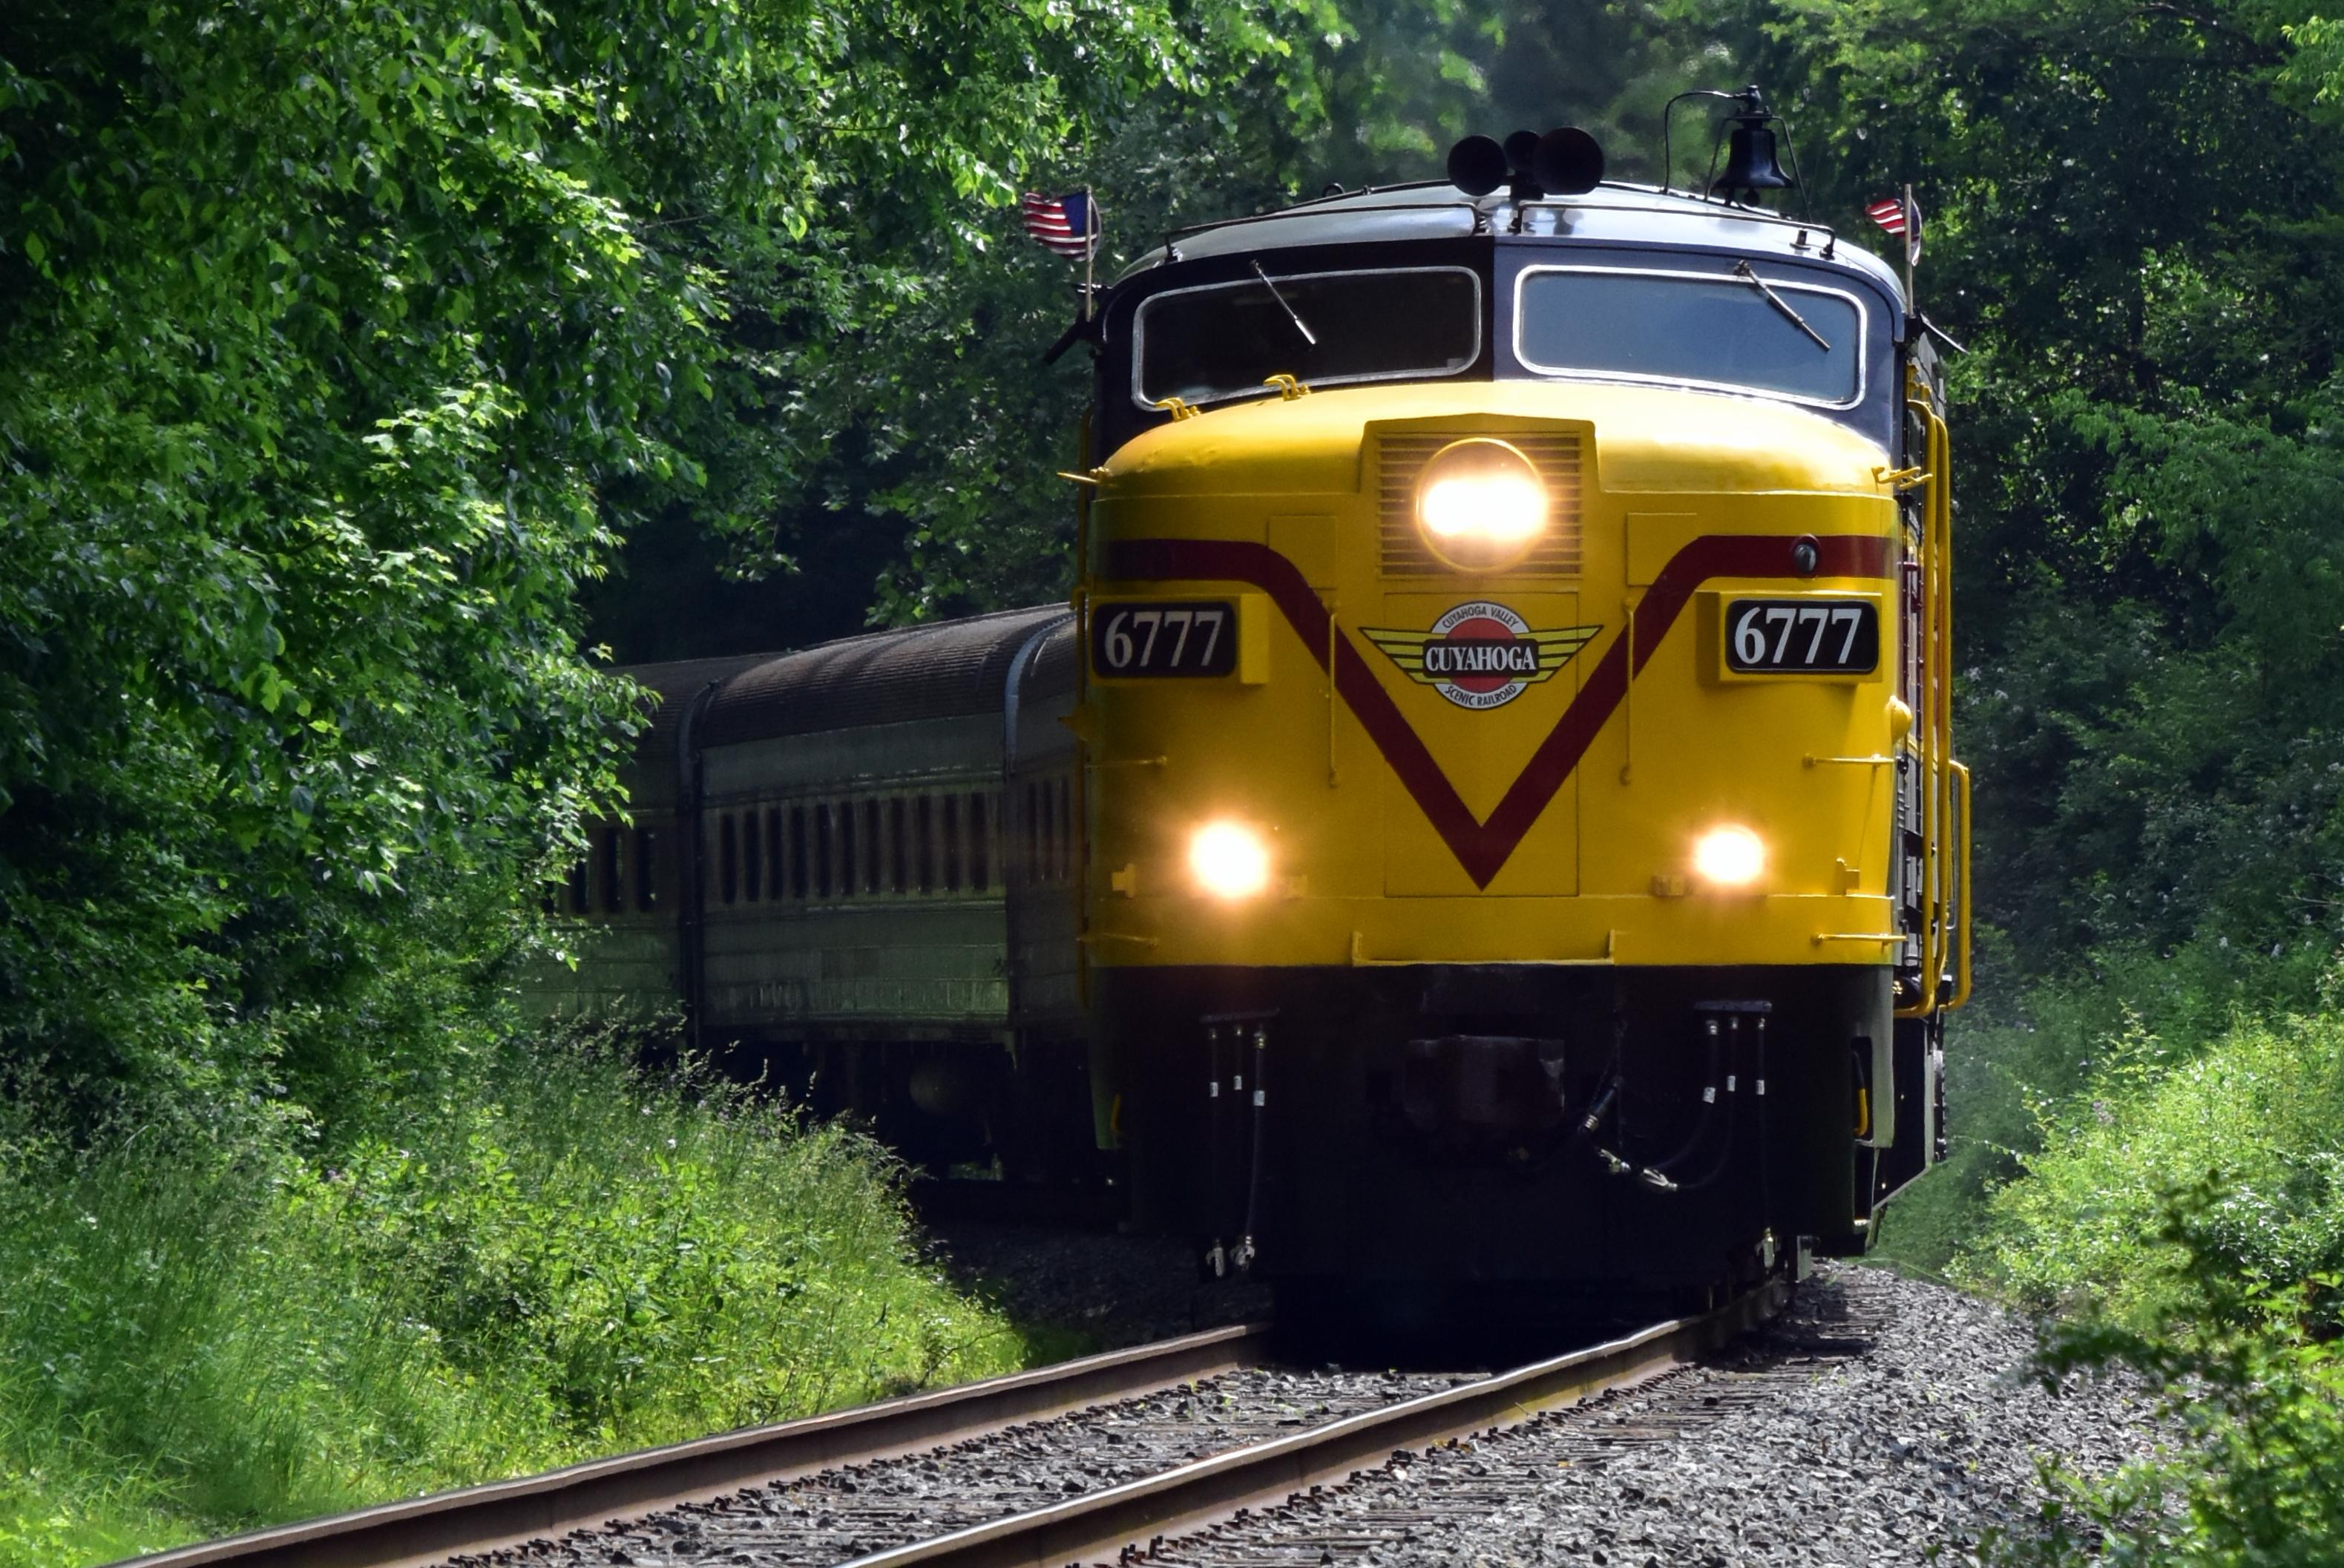 A yellow-and-red engine with number 6777 leads a passenger train along tracks through green trees.